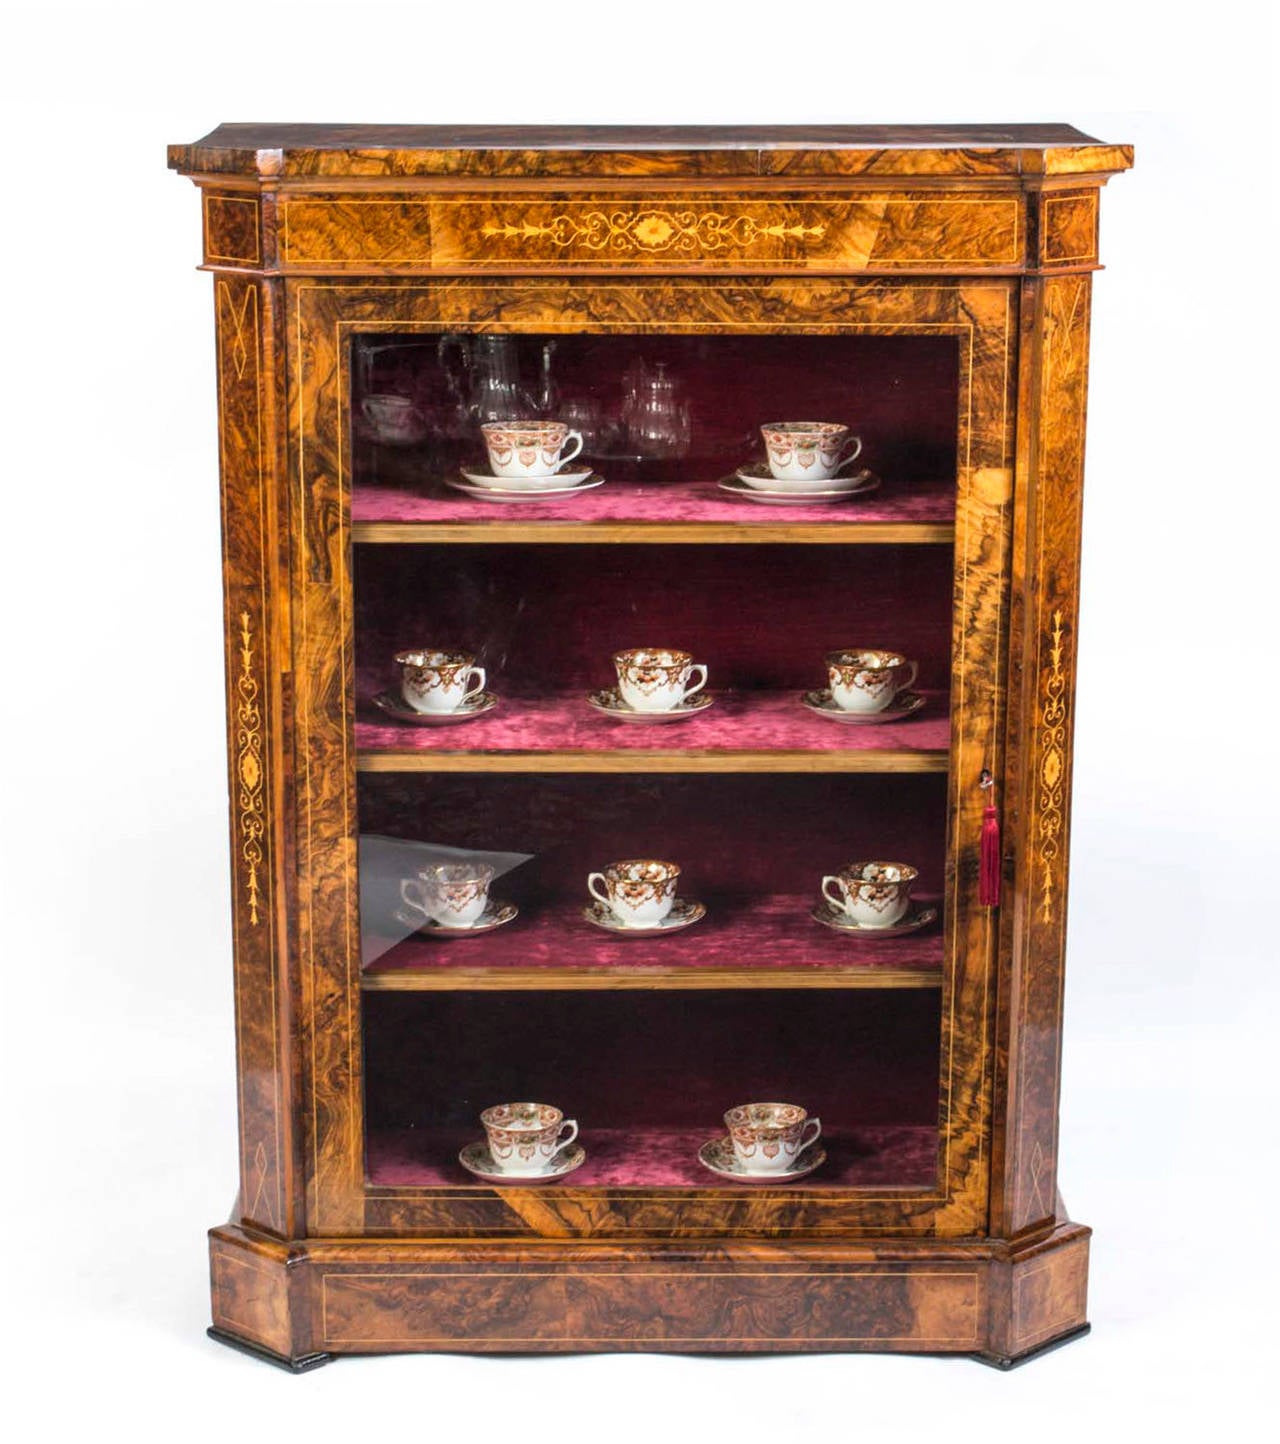 This is a lovely antique Victorian burr walnut pier cabinet, circa 1860. 

It has been accomplished in burr walnut with a glazed door enclosing interiors lined with burgundy velvet and three shelves. 

It is an unusually tall for a pier cabinet